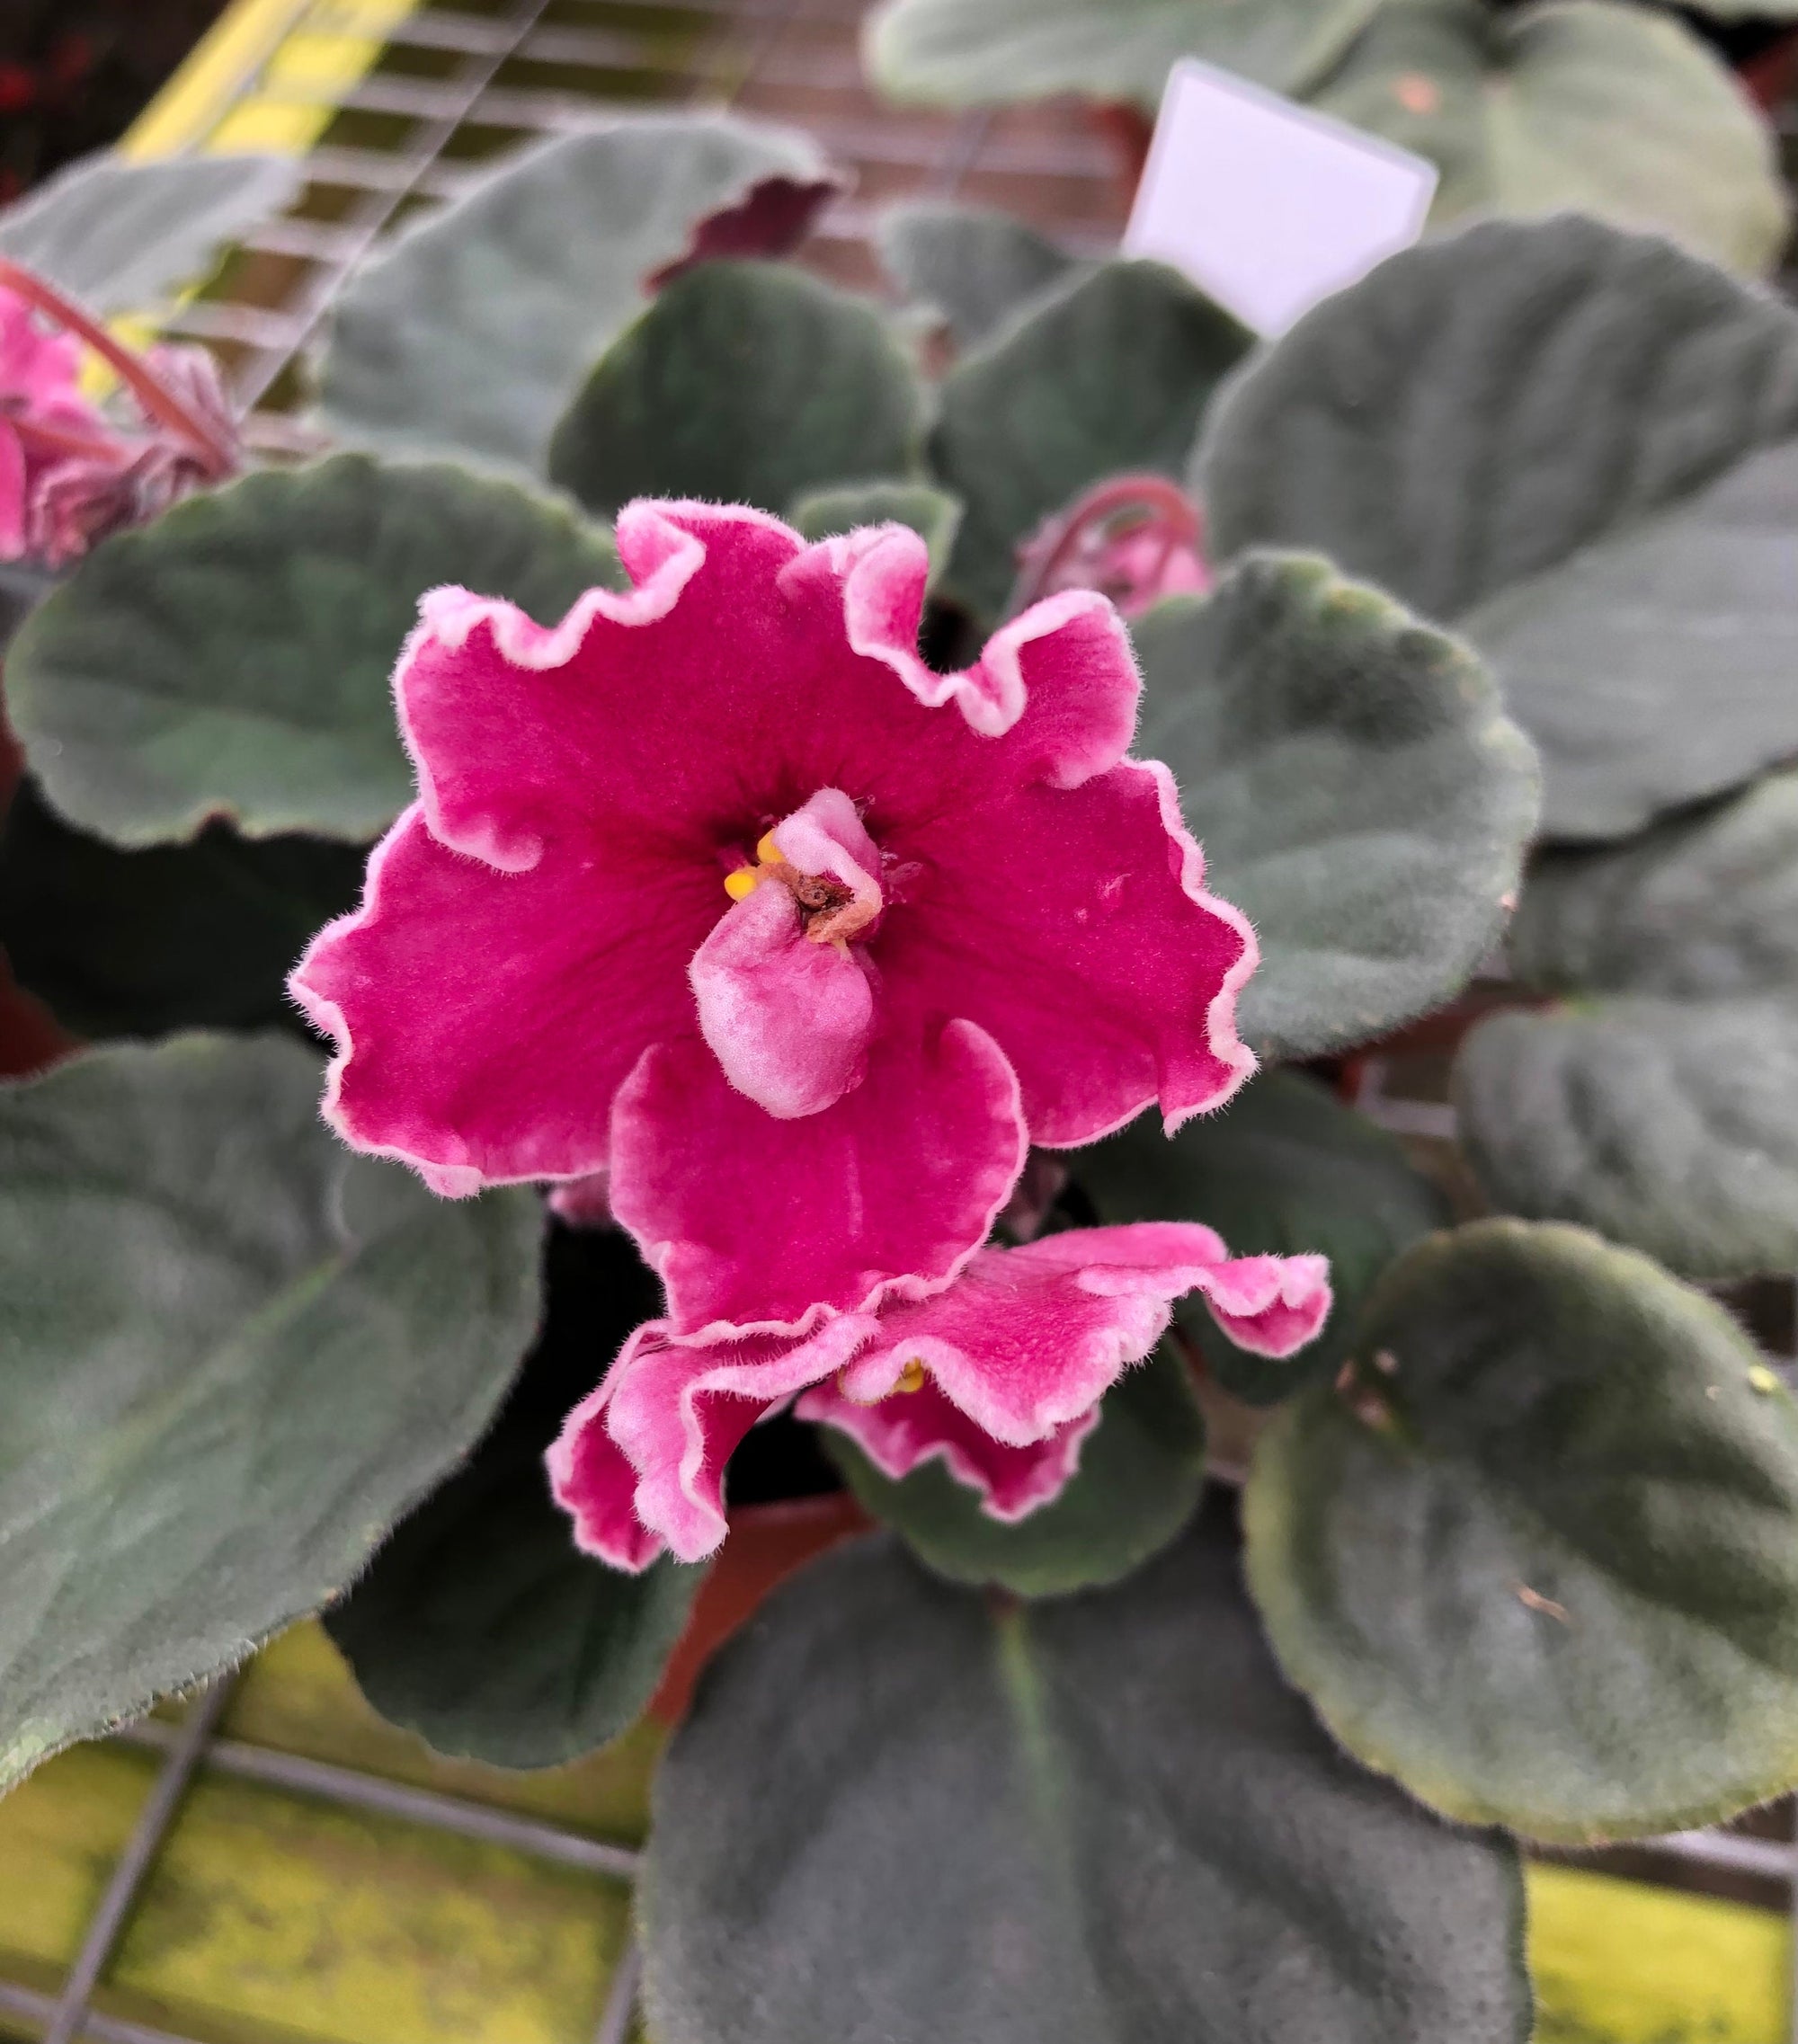 Live house plant variegated fantasy bloom African Violet Harmonys Rumba Red garden 4 flower Potted gift